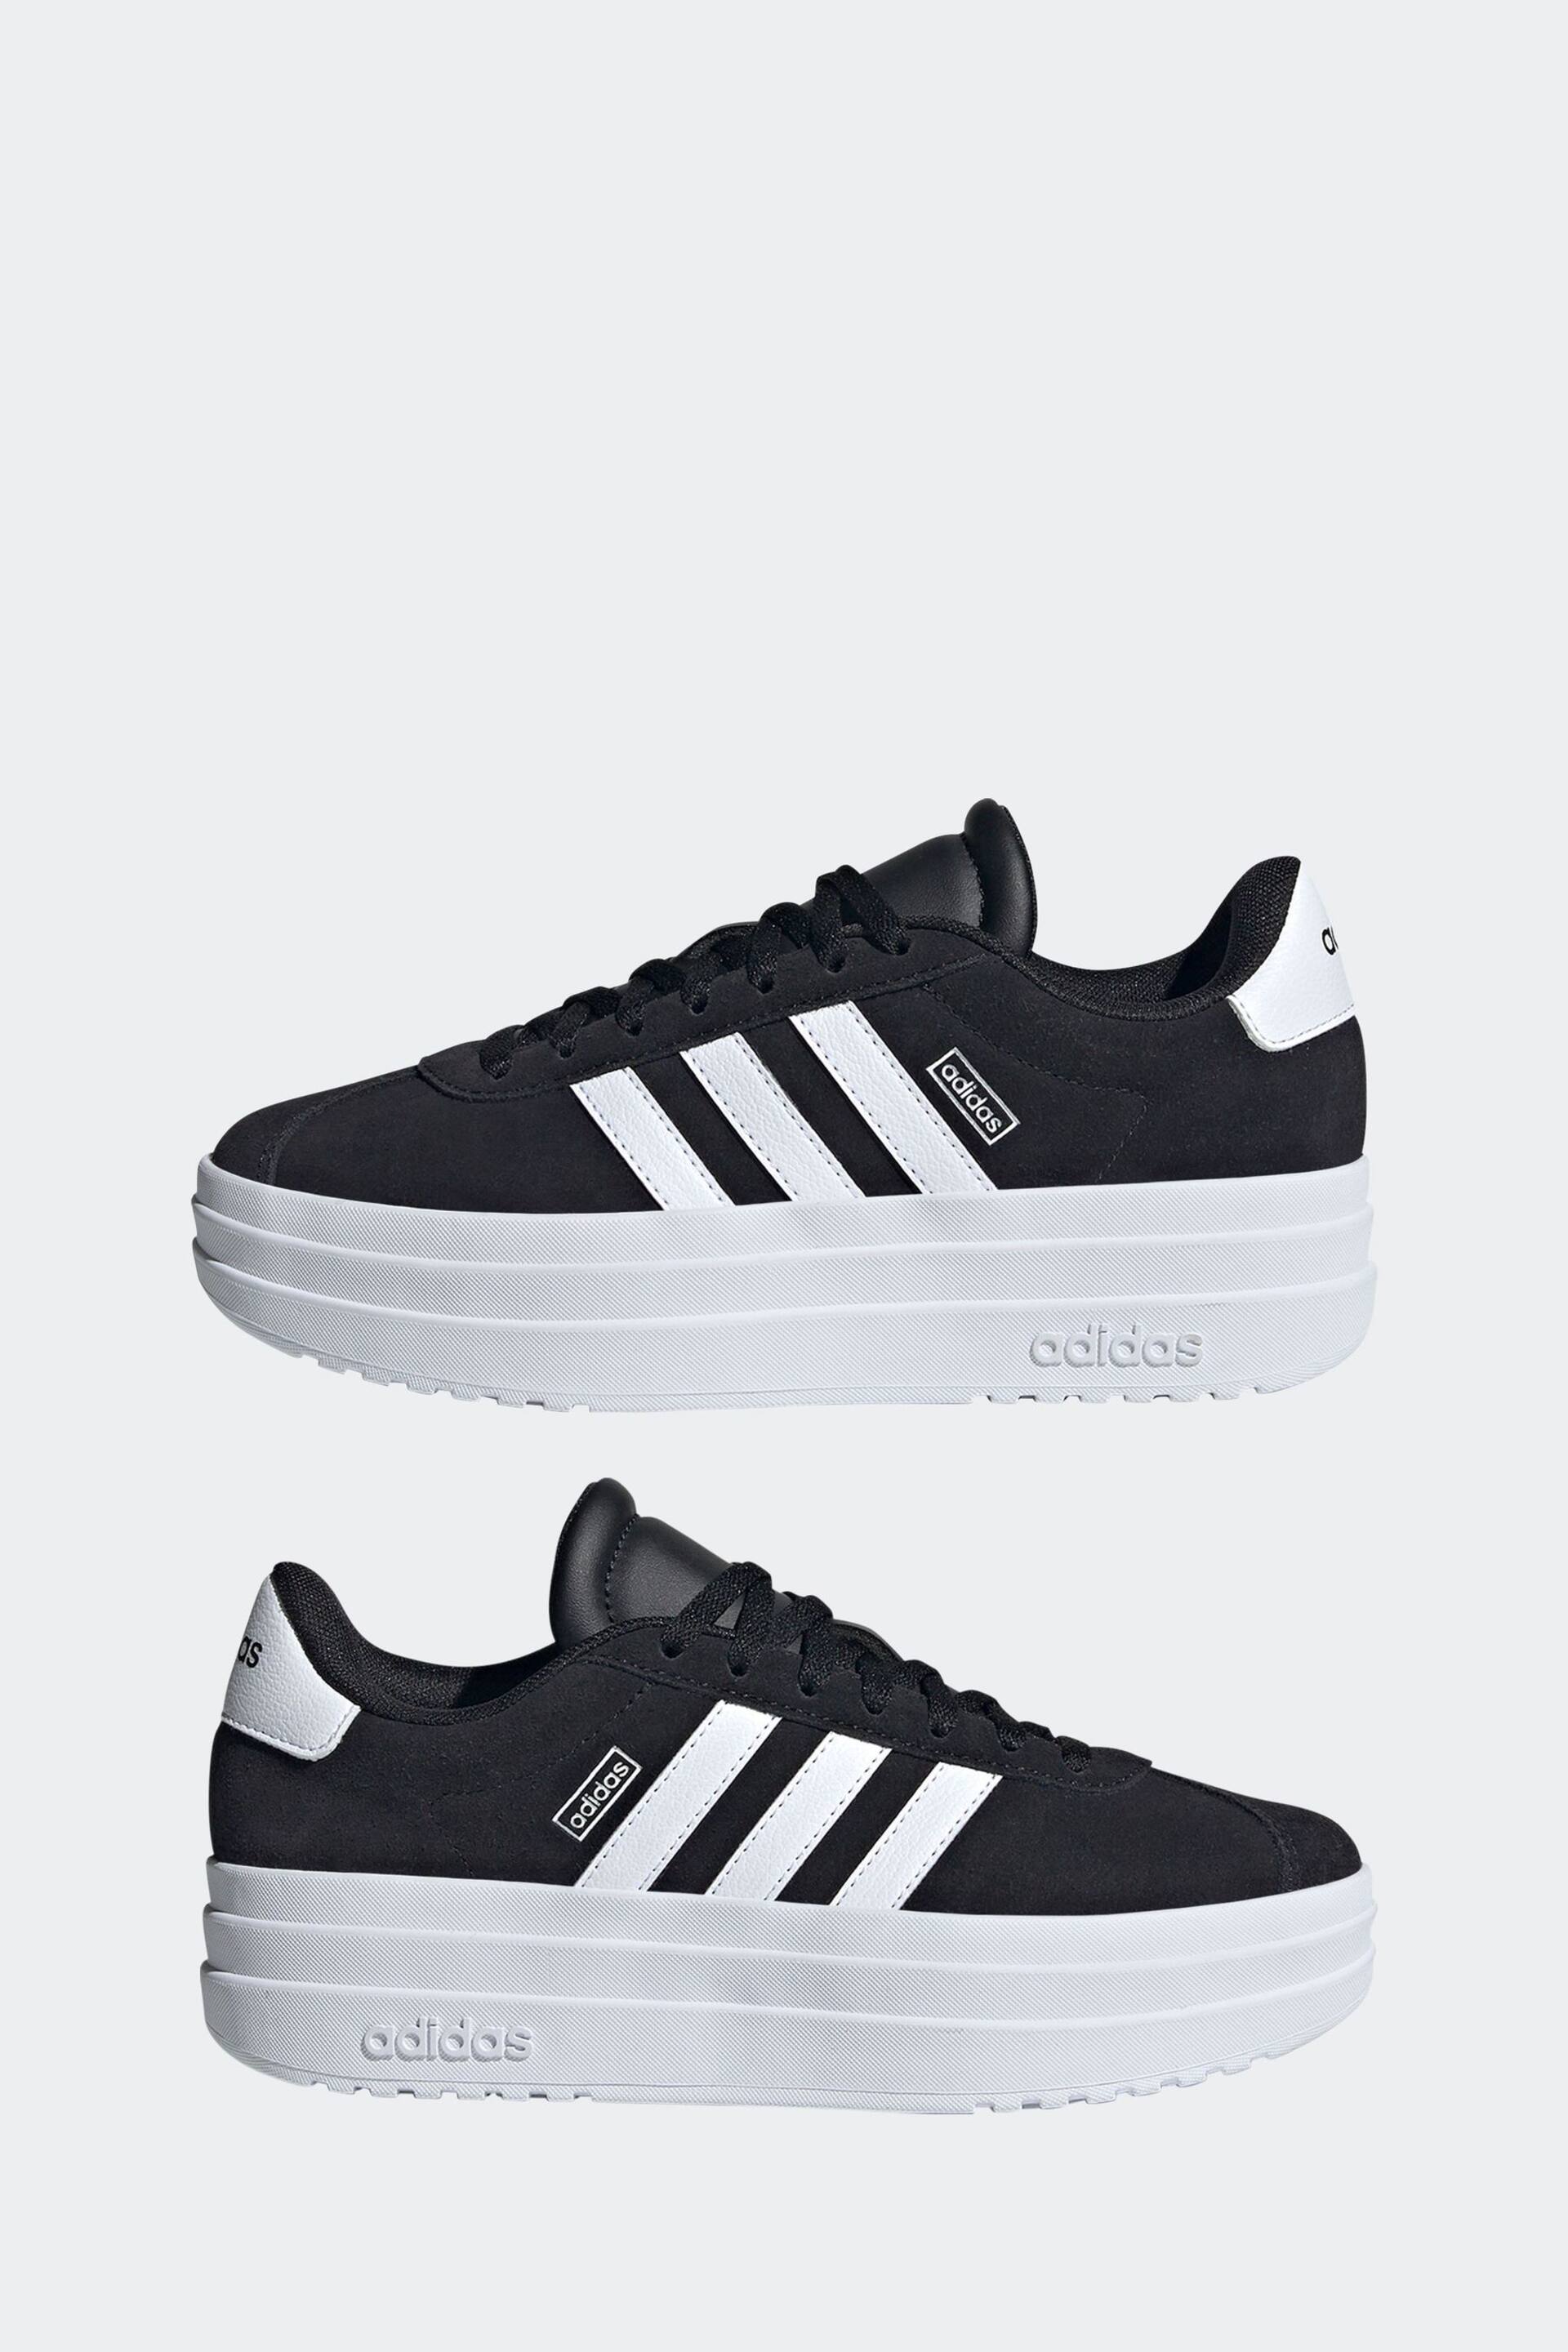 adidas Black/White Kids VL Court Bold Trainers - Image 7 of 12